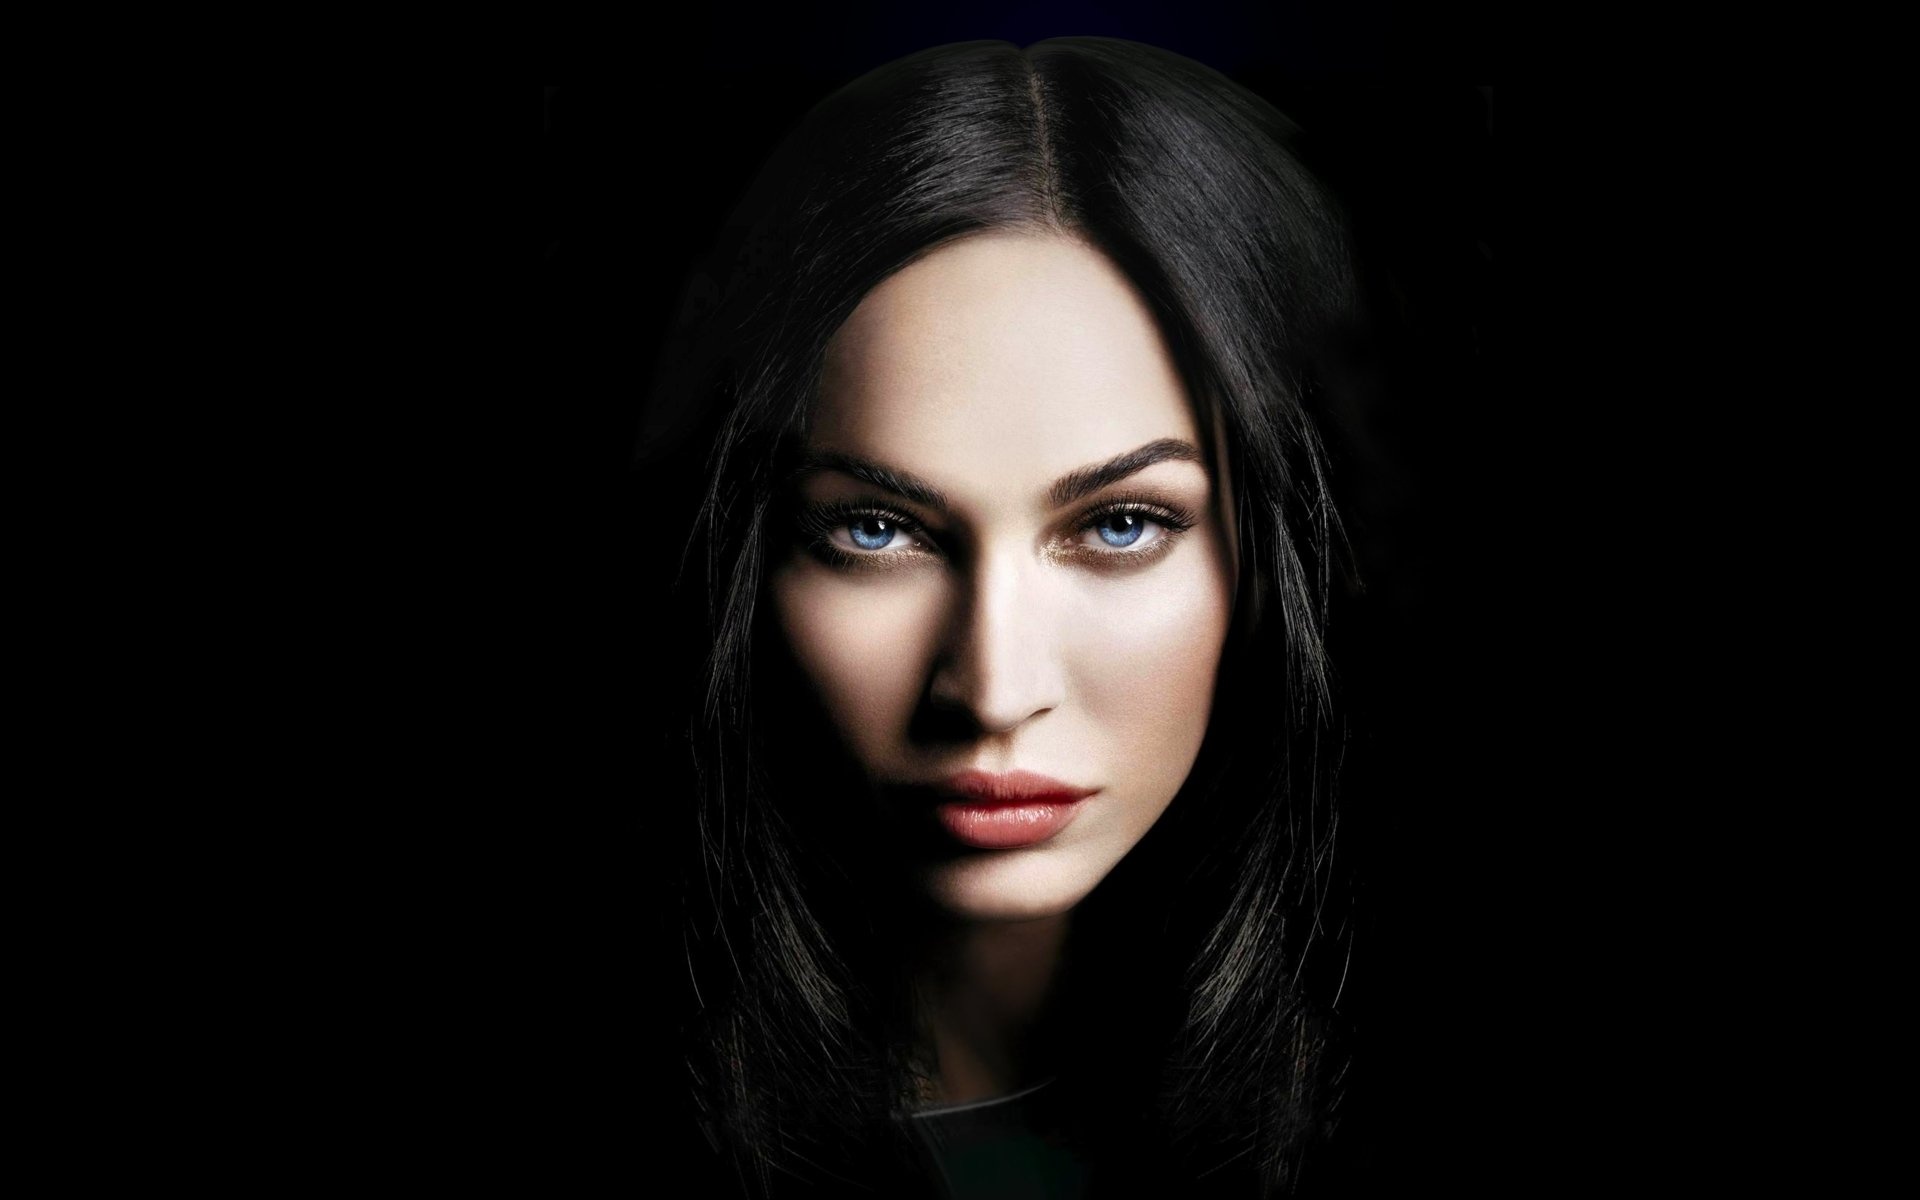 Megan Fox: Made an appearance in the CBS hit comedy Two and a Half Men, starring Charlie Sheen and Jon Cryer. 1920x1200 HD Wallpaper.